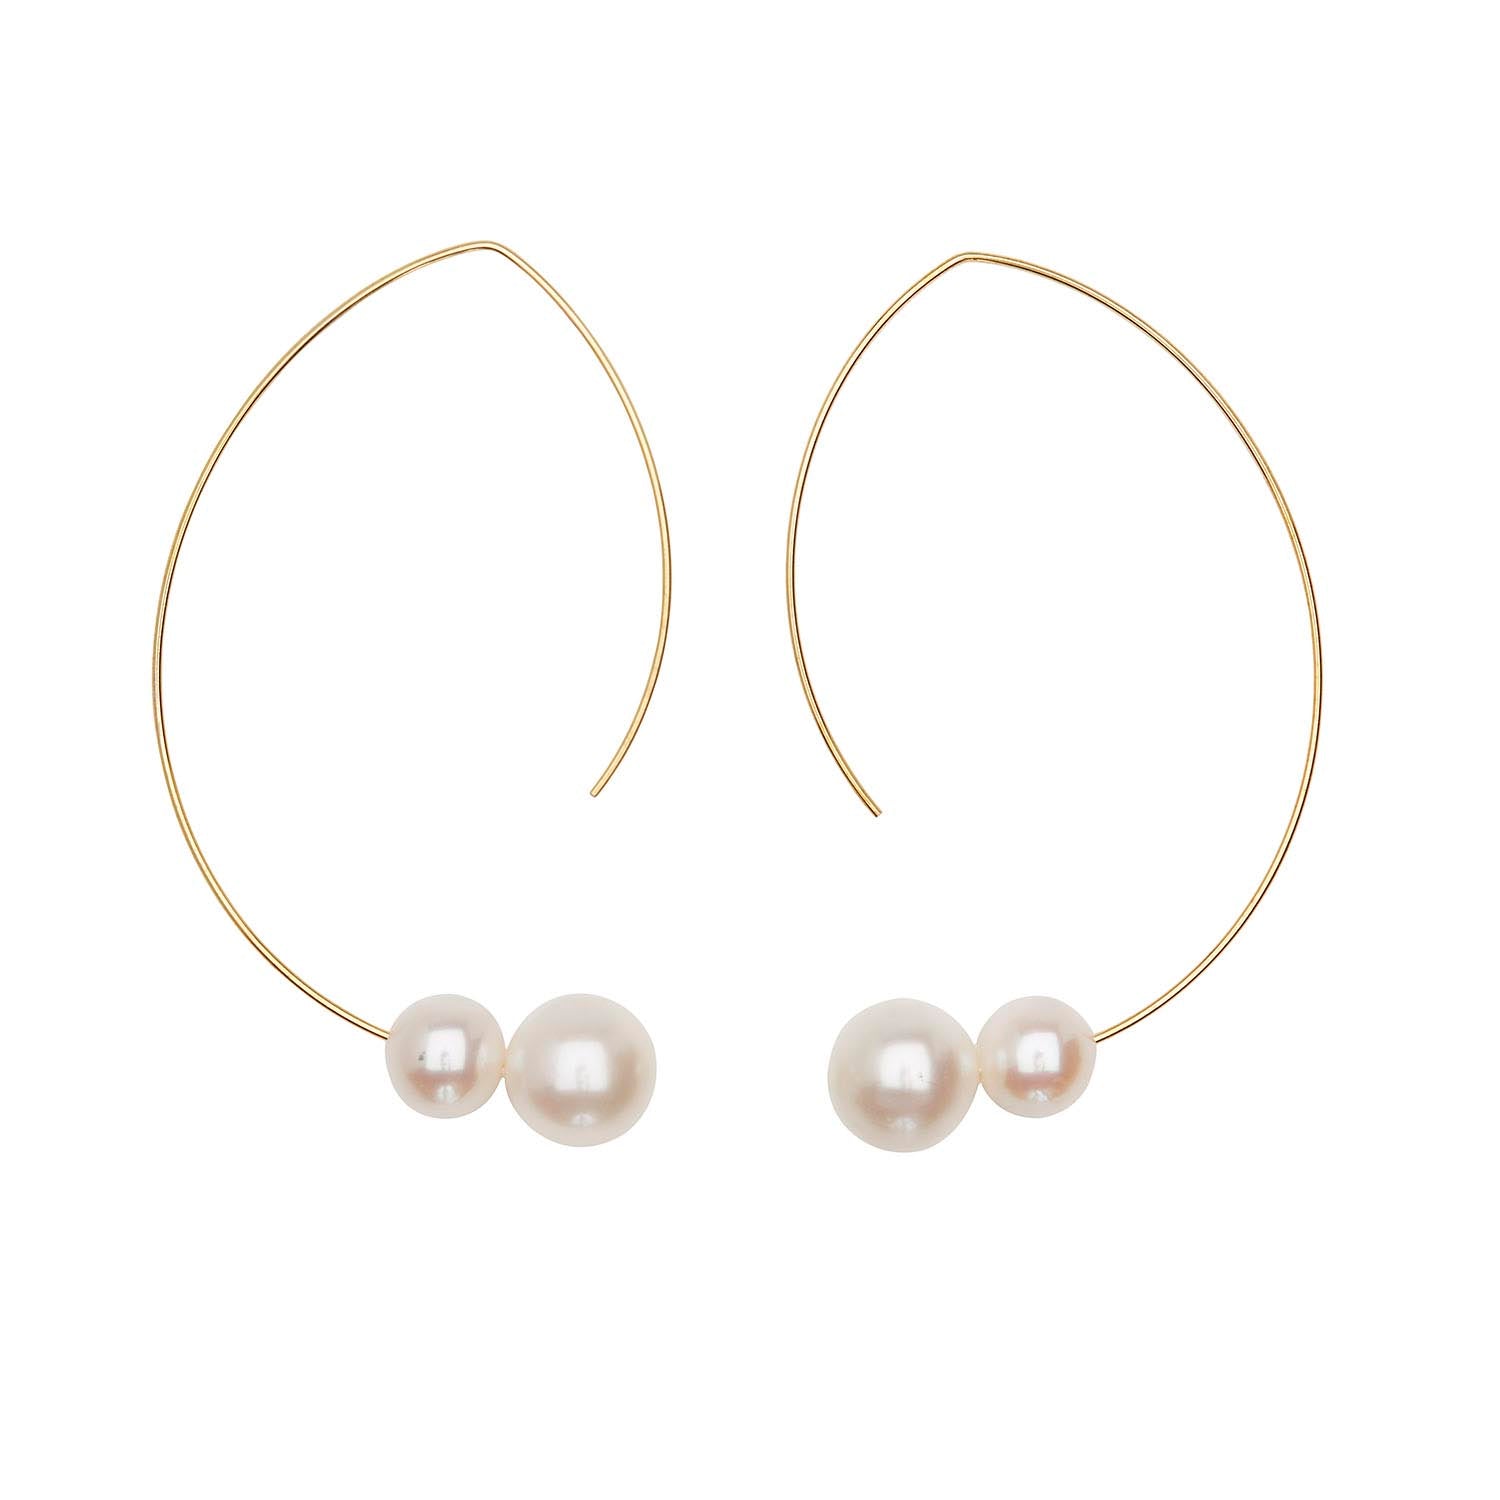 Arched Earrings with White Pearls